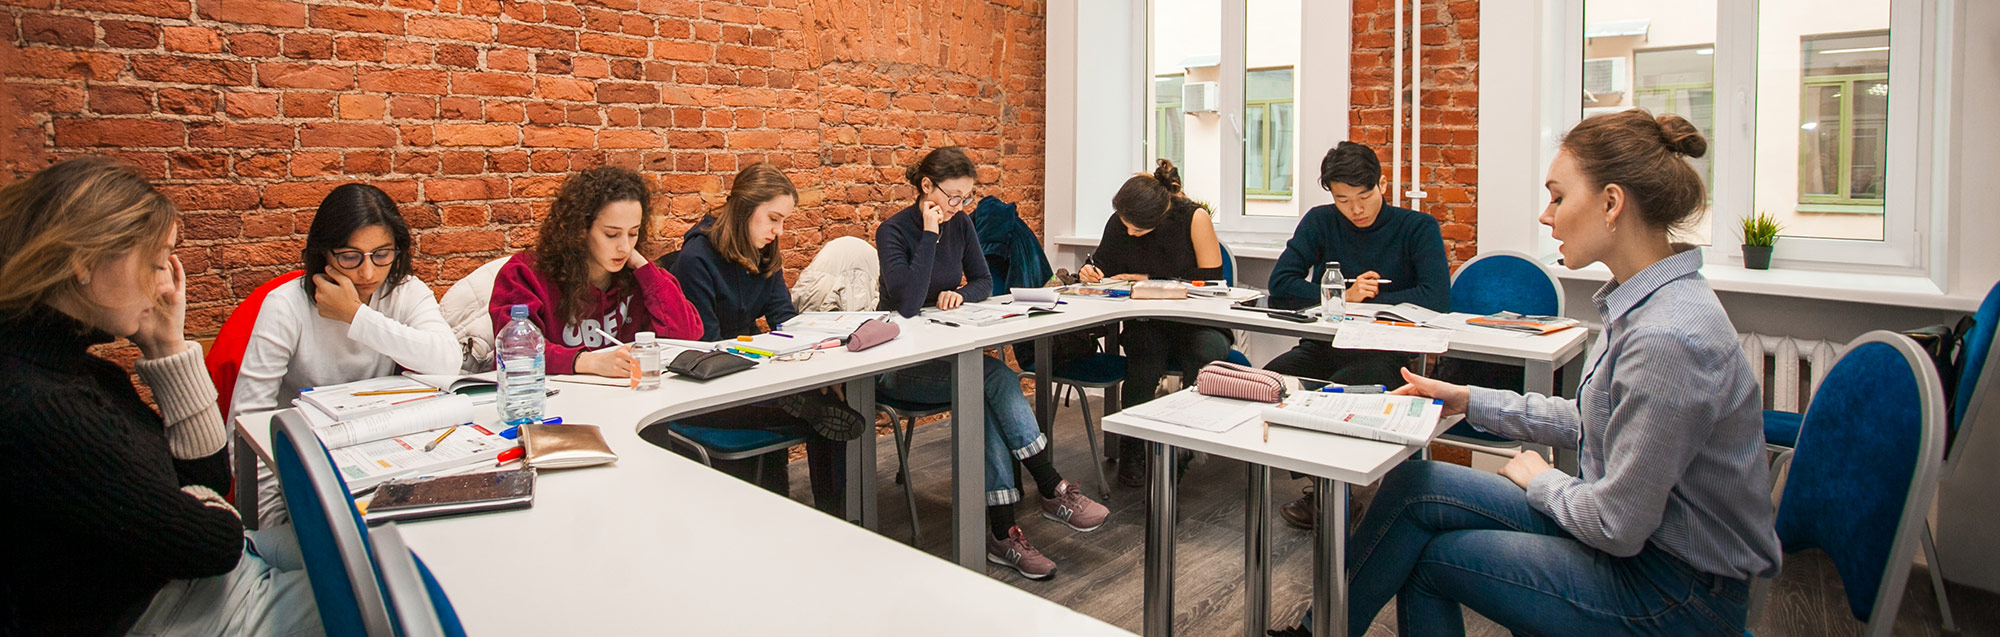 Language courses and prices at Liden & Denz St Petersburg